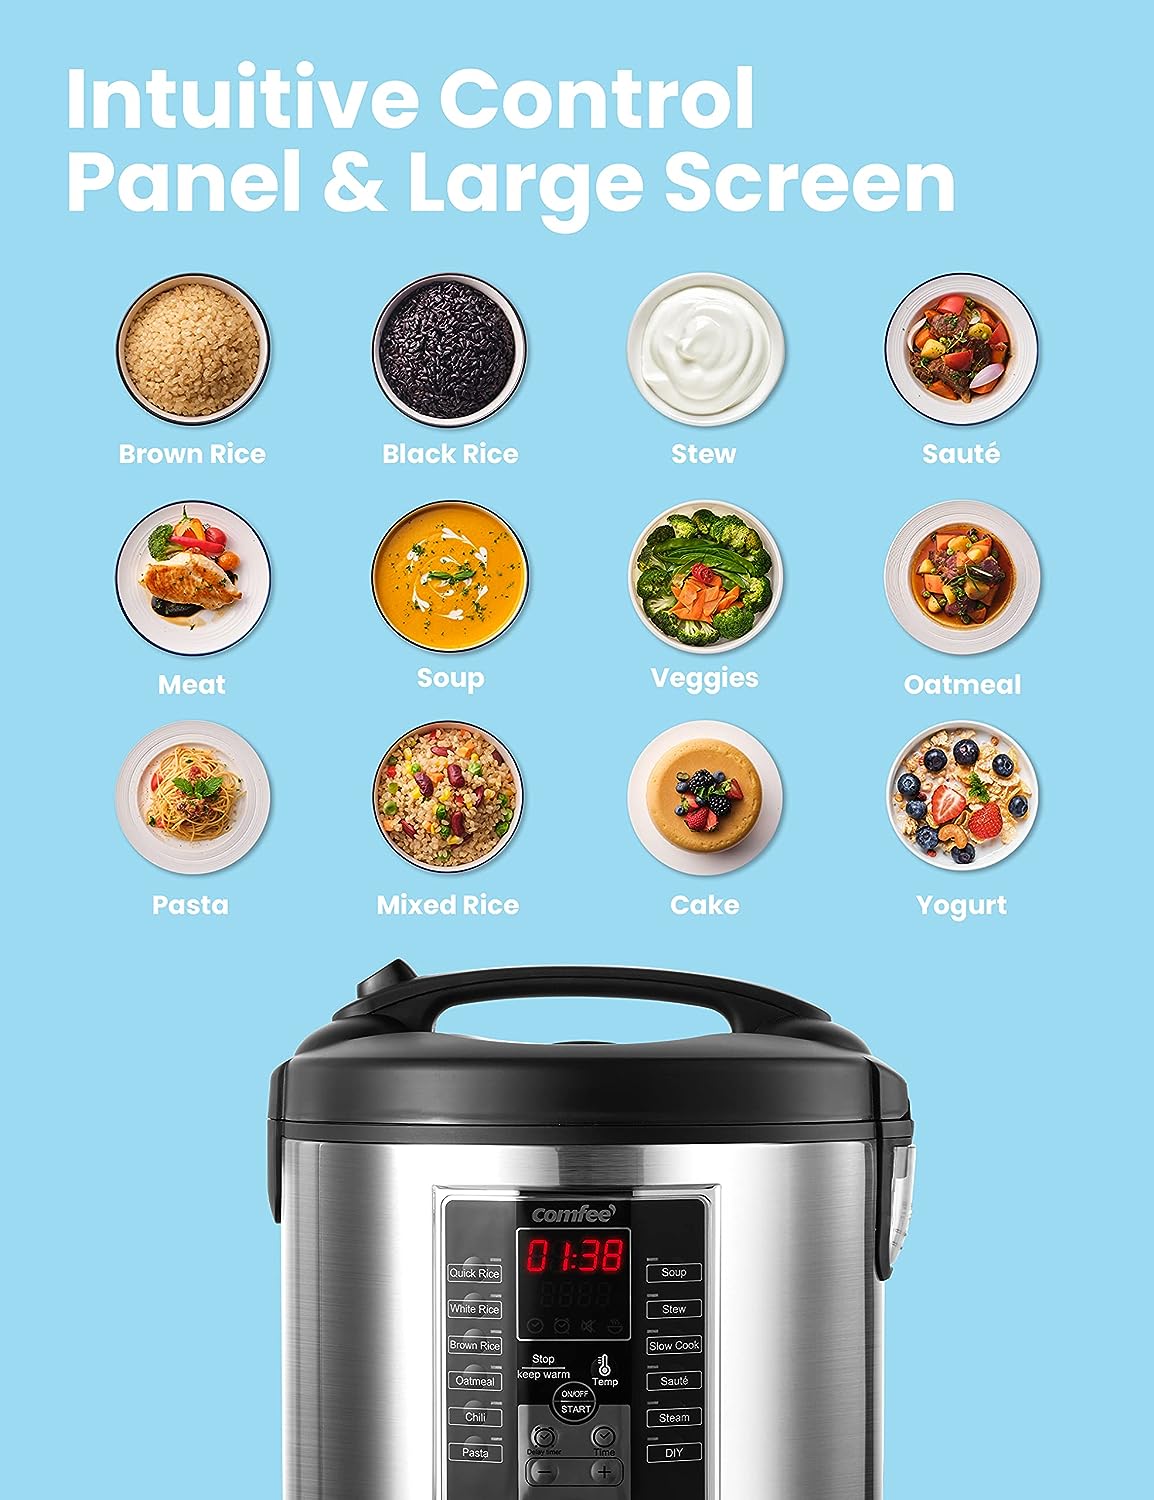 Rice Cooker, Food Steamer, Slow cooker, All in One Digital